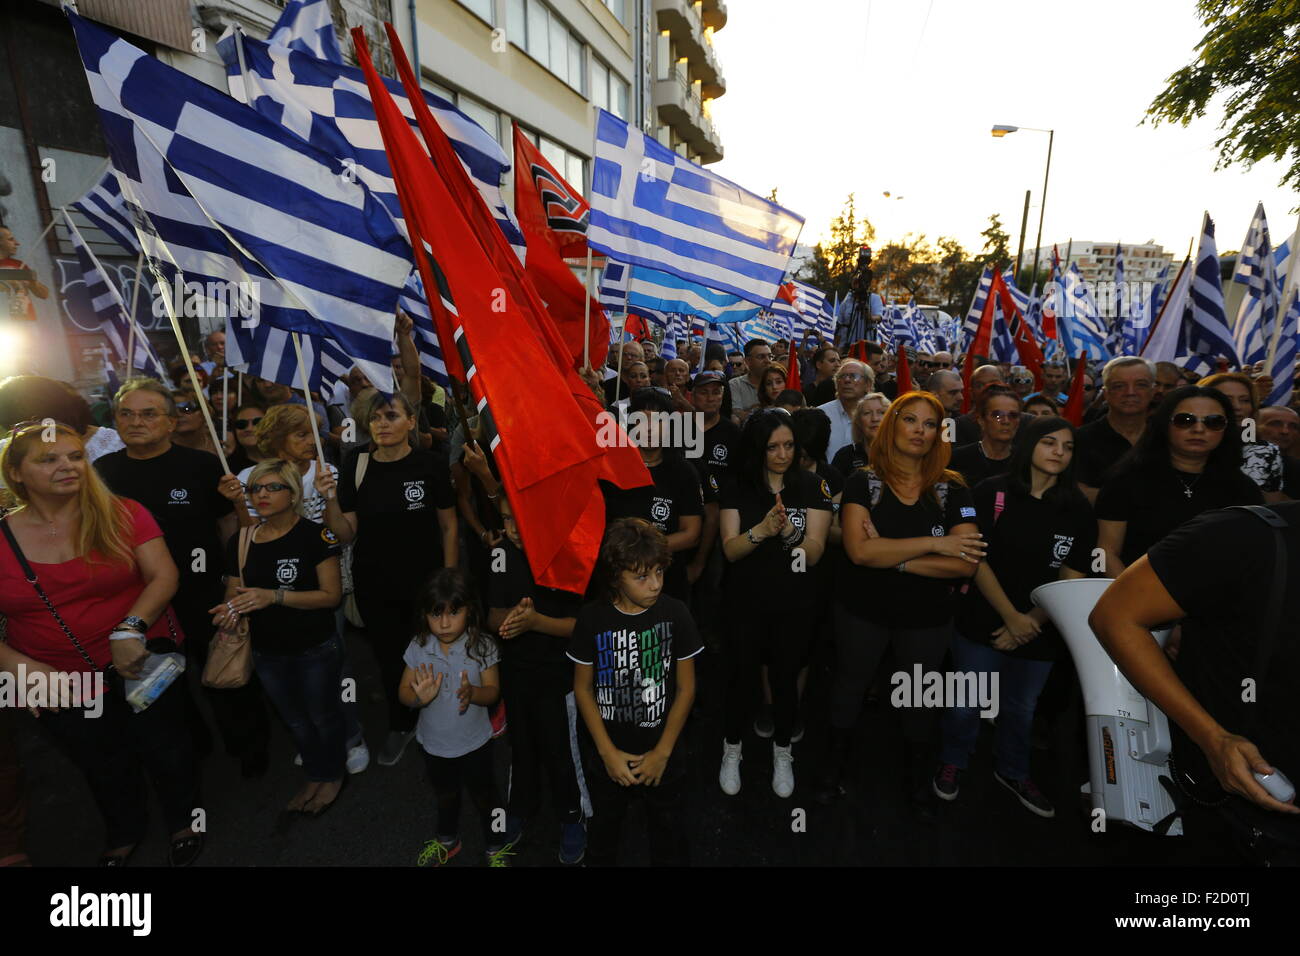 Athens, Greece. 16th September 2015. Golden Dawn supporters wave Greek and Golden Dawn flags  at the election rally in Athens. Greek right wing  party Golden Dawn held an election rally in Athens, four days ahead of election day. The party hopes to gain enough seats in the election to become the third latest party in the Greek Parliament. Credit:  Michael Debets/Alamy Live News Stock Photo